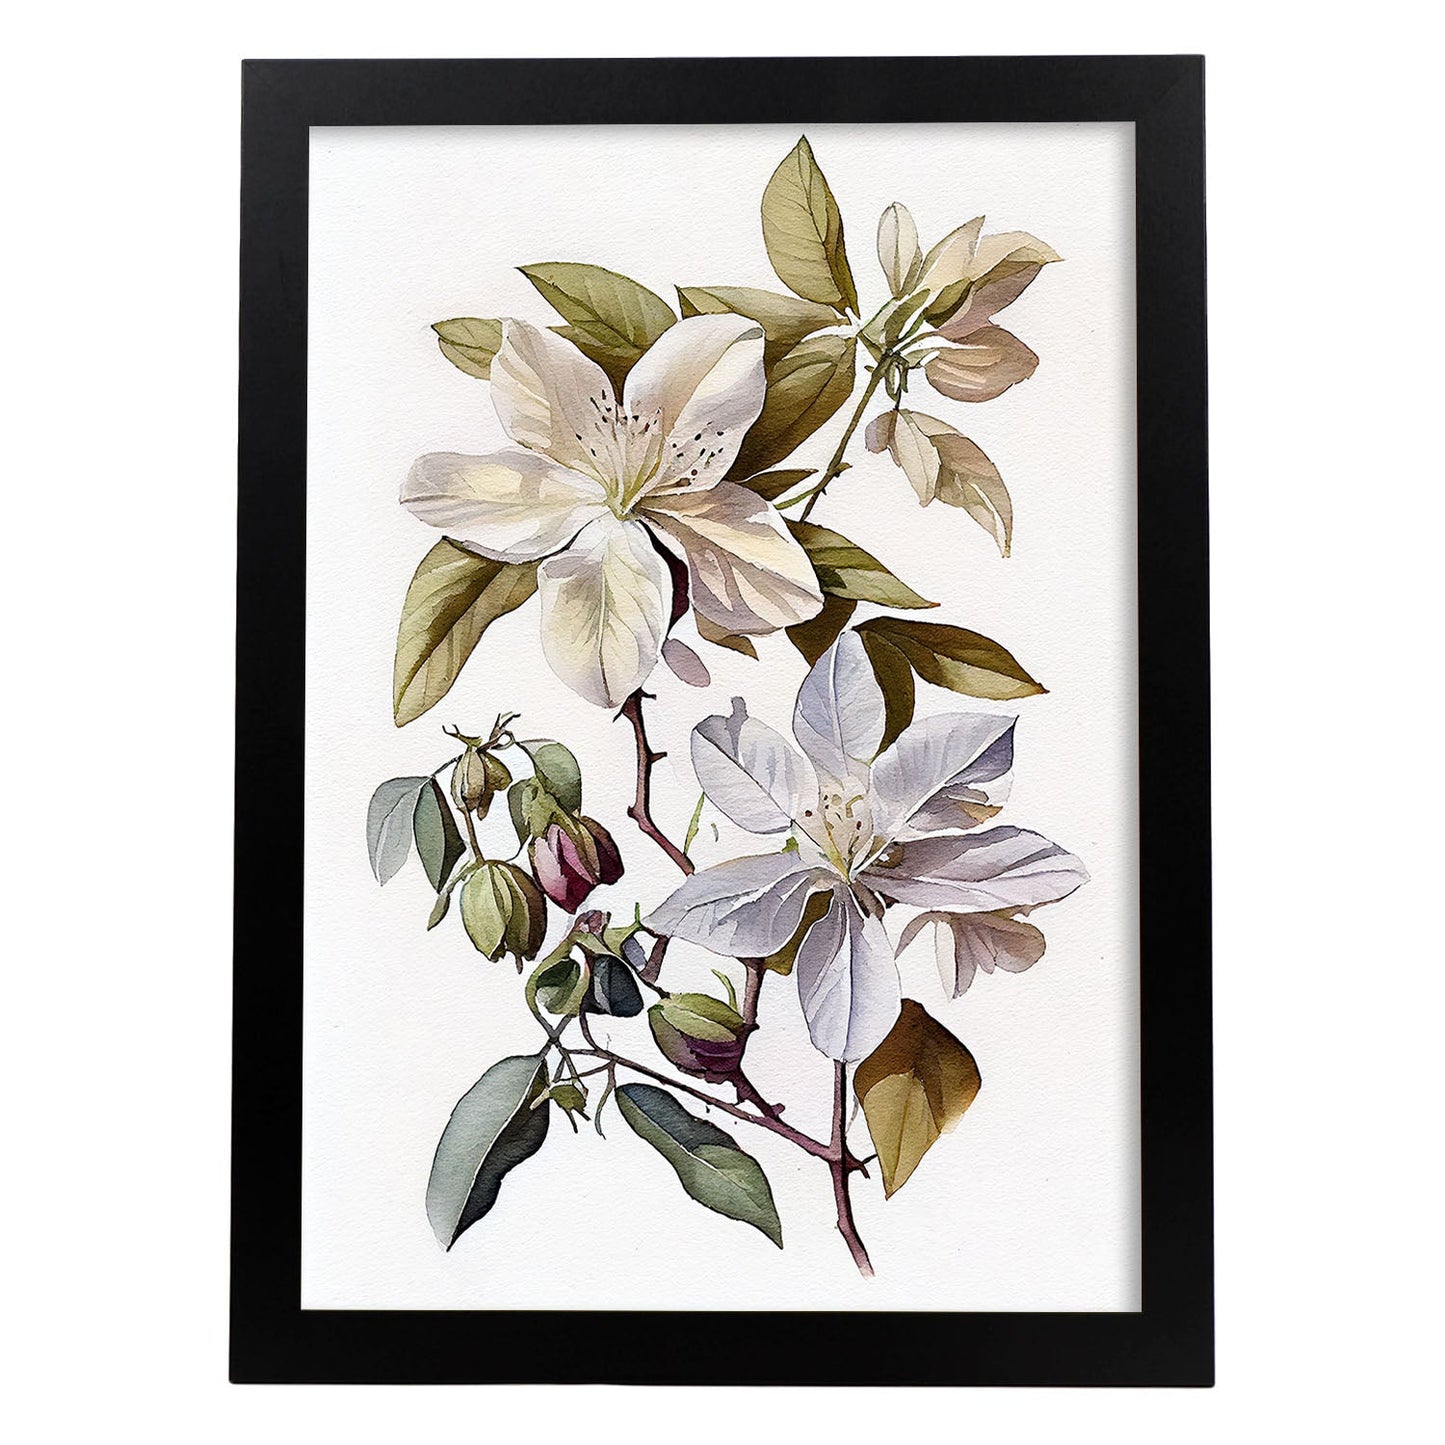 Nacnic watercolor minmal Clematis_4. Aesthetic Wall Art Prints for Bedroom or Living Room Design.